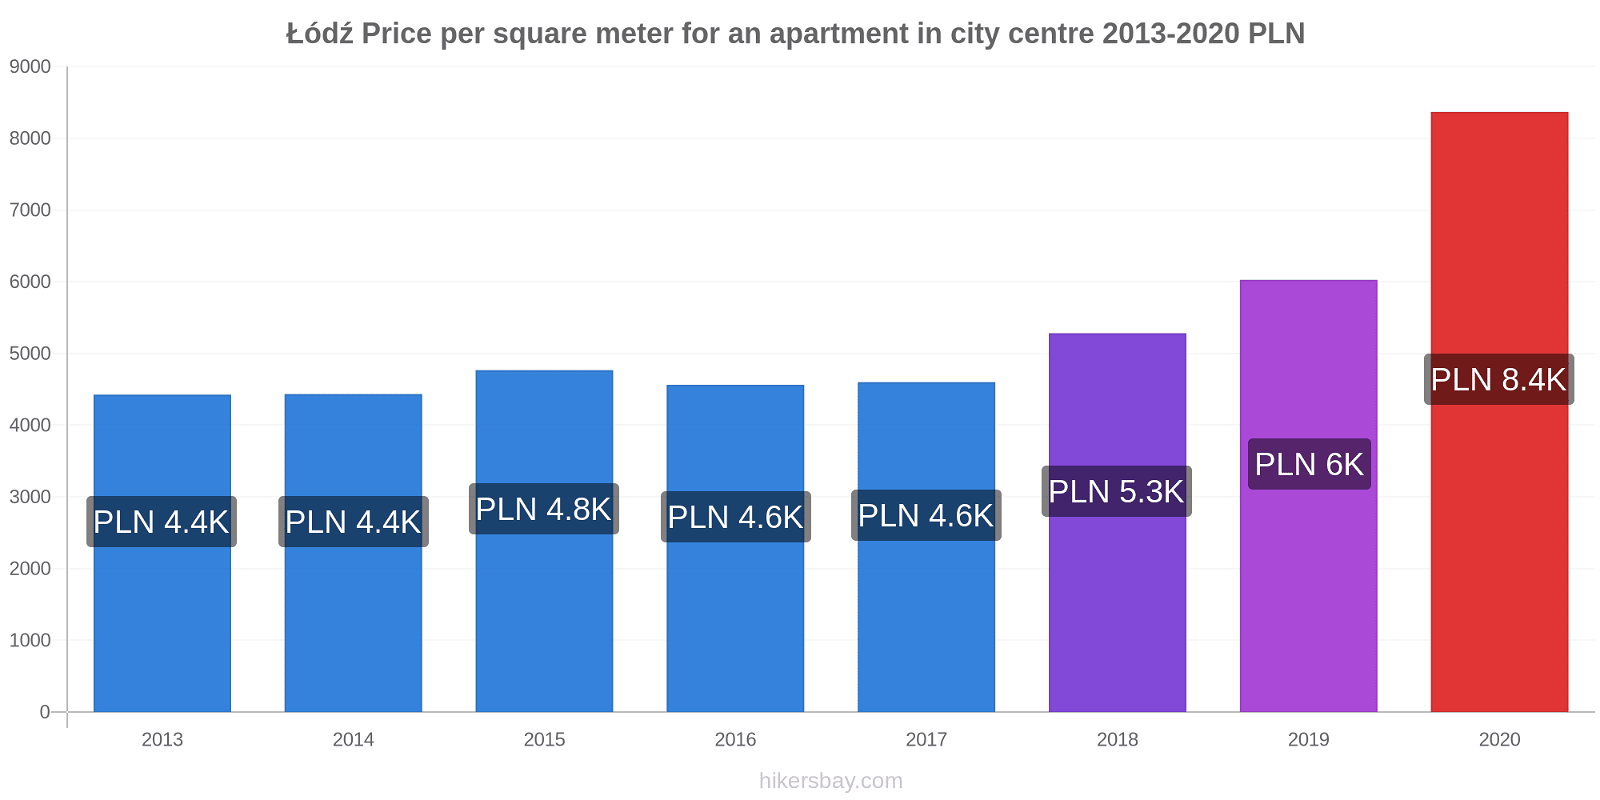 Łódź price changes Price per square meter for an apartment in city centre hikersbay.com